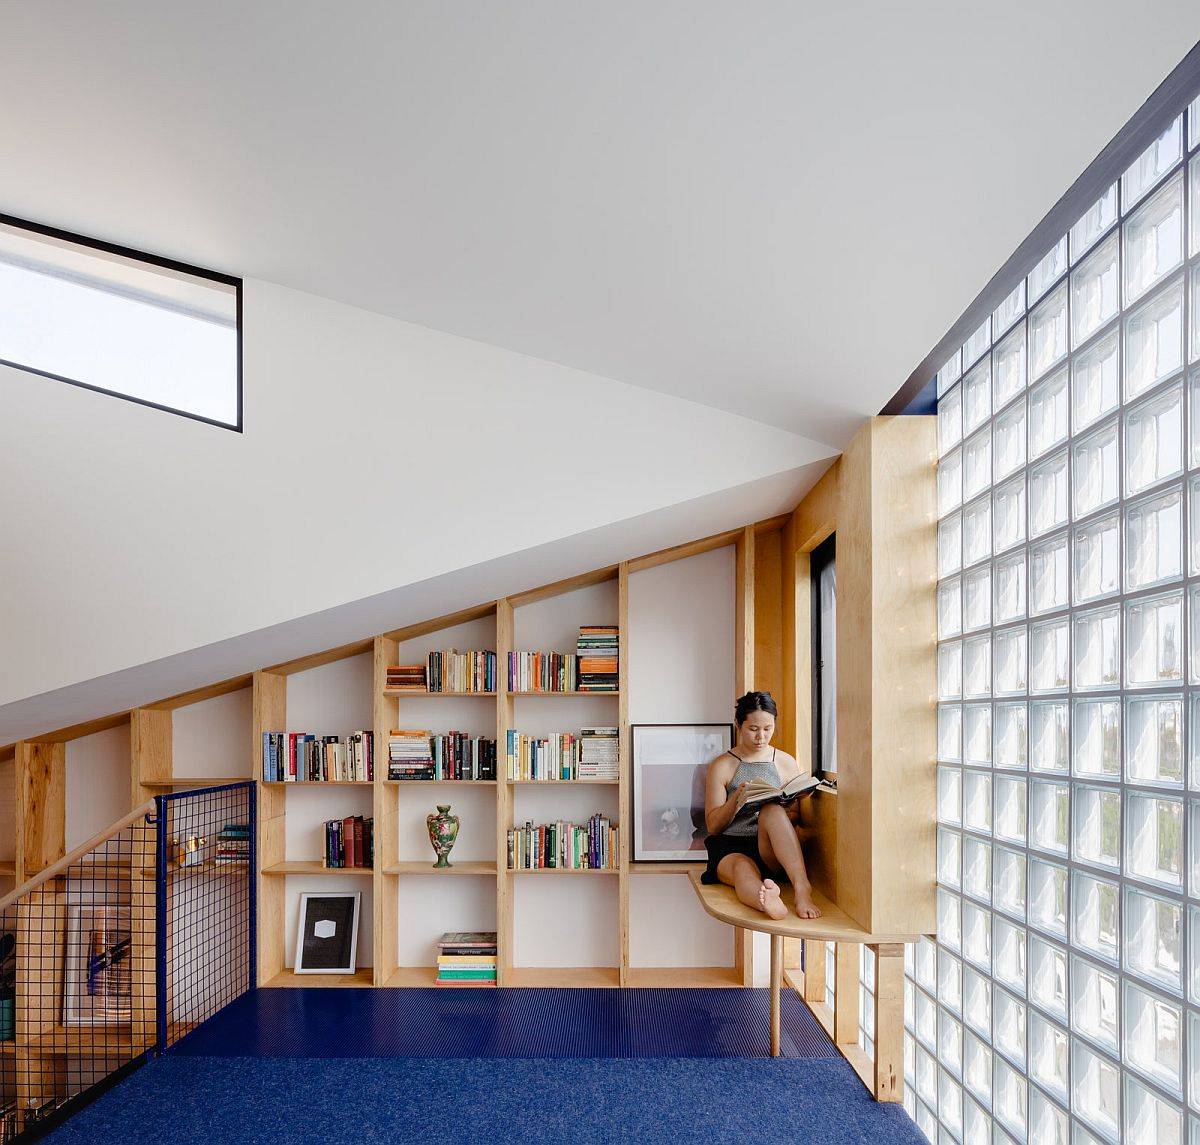 Gorgeous use of glass blocks to usher in filtered natural light